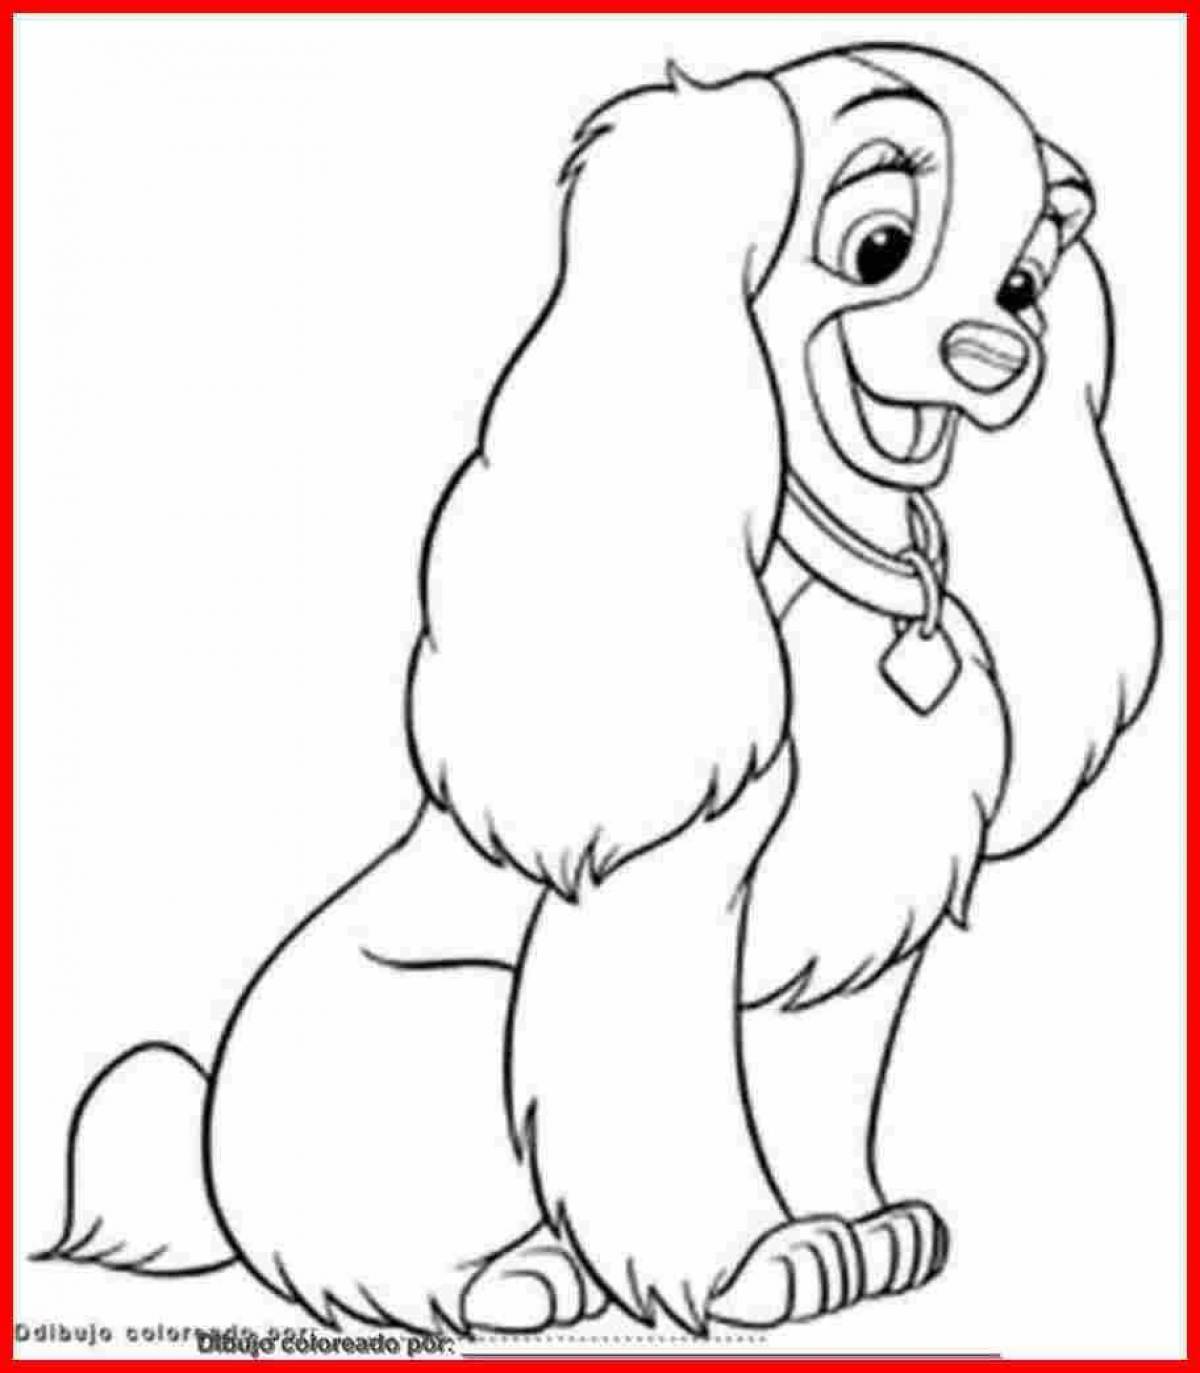 A funny dog ​​coloring book for schoolchildren